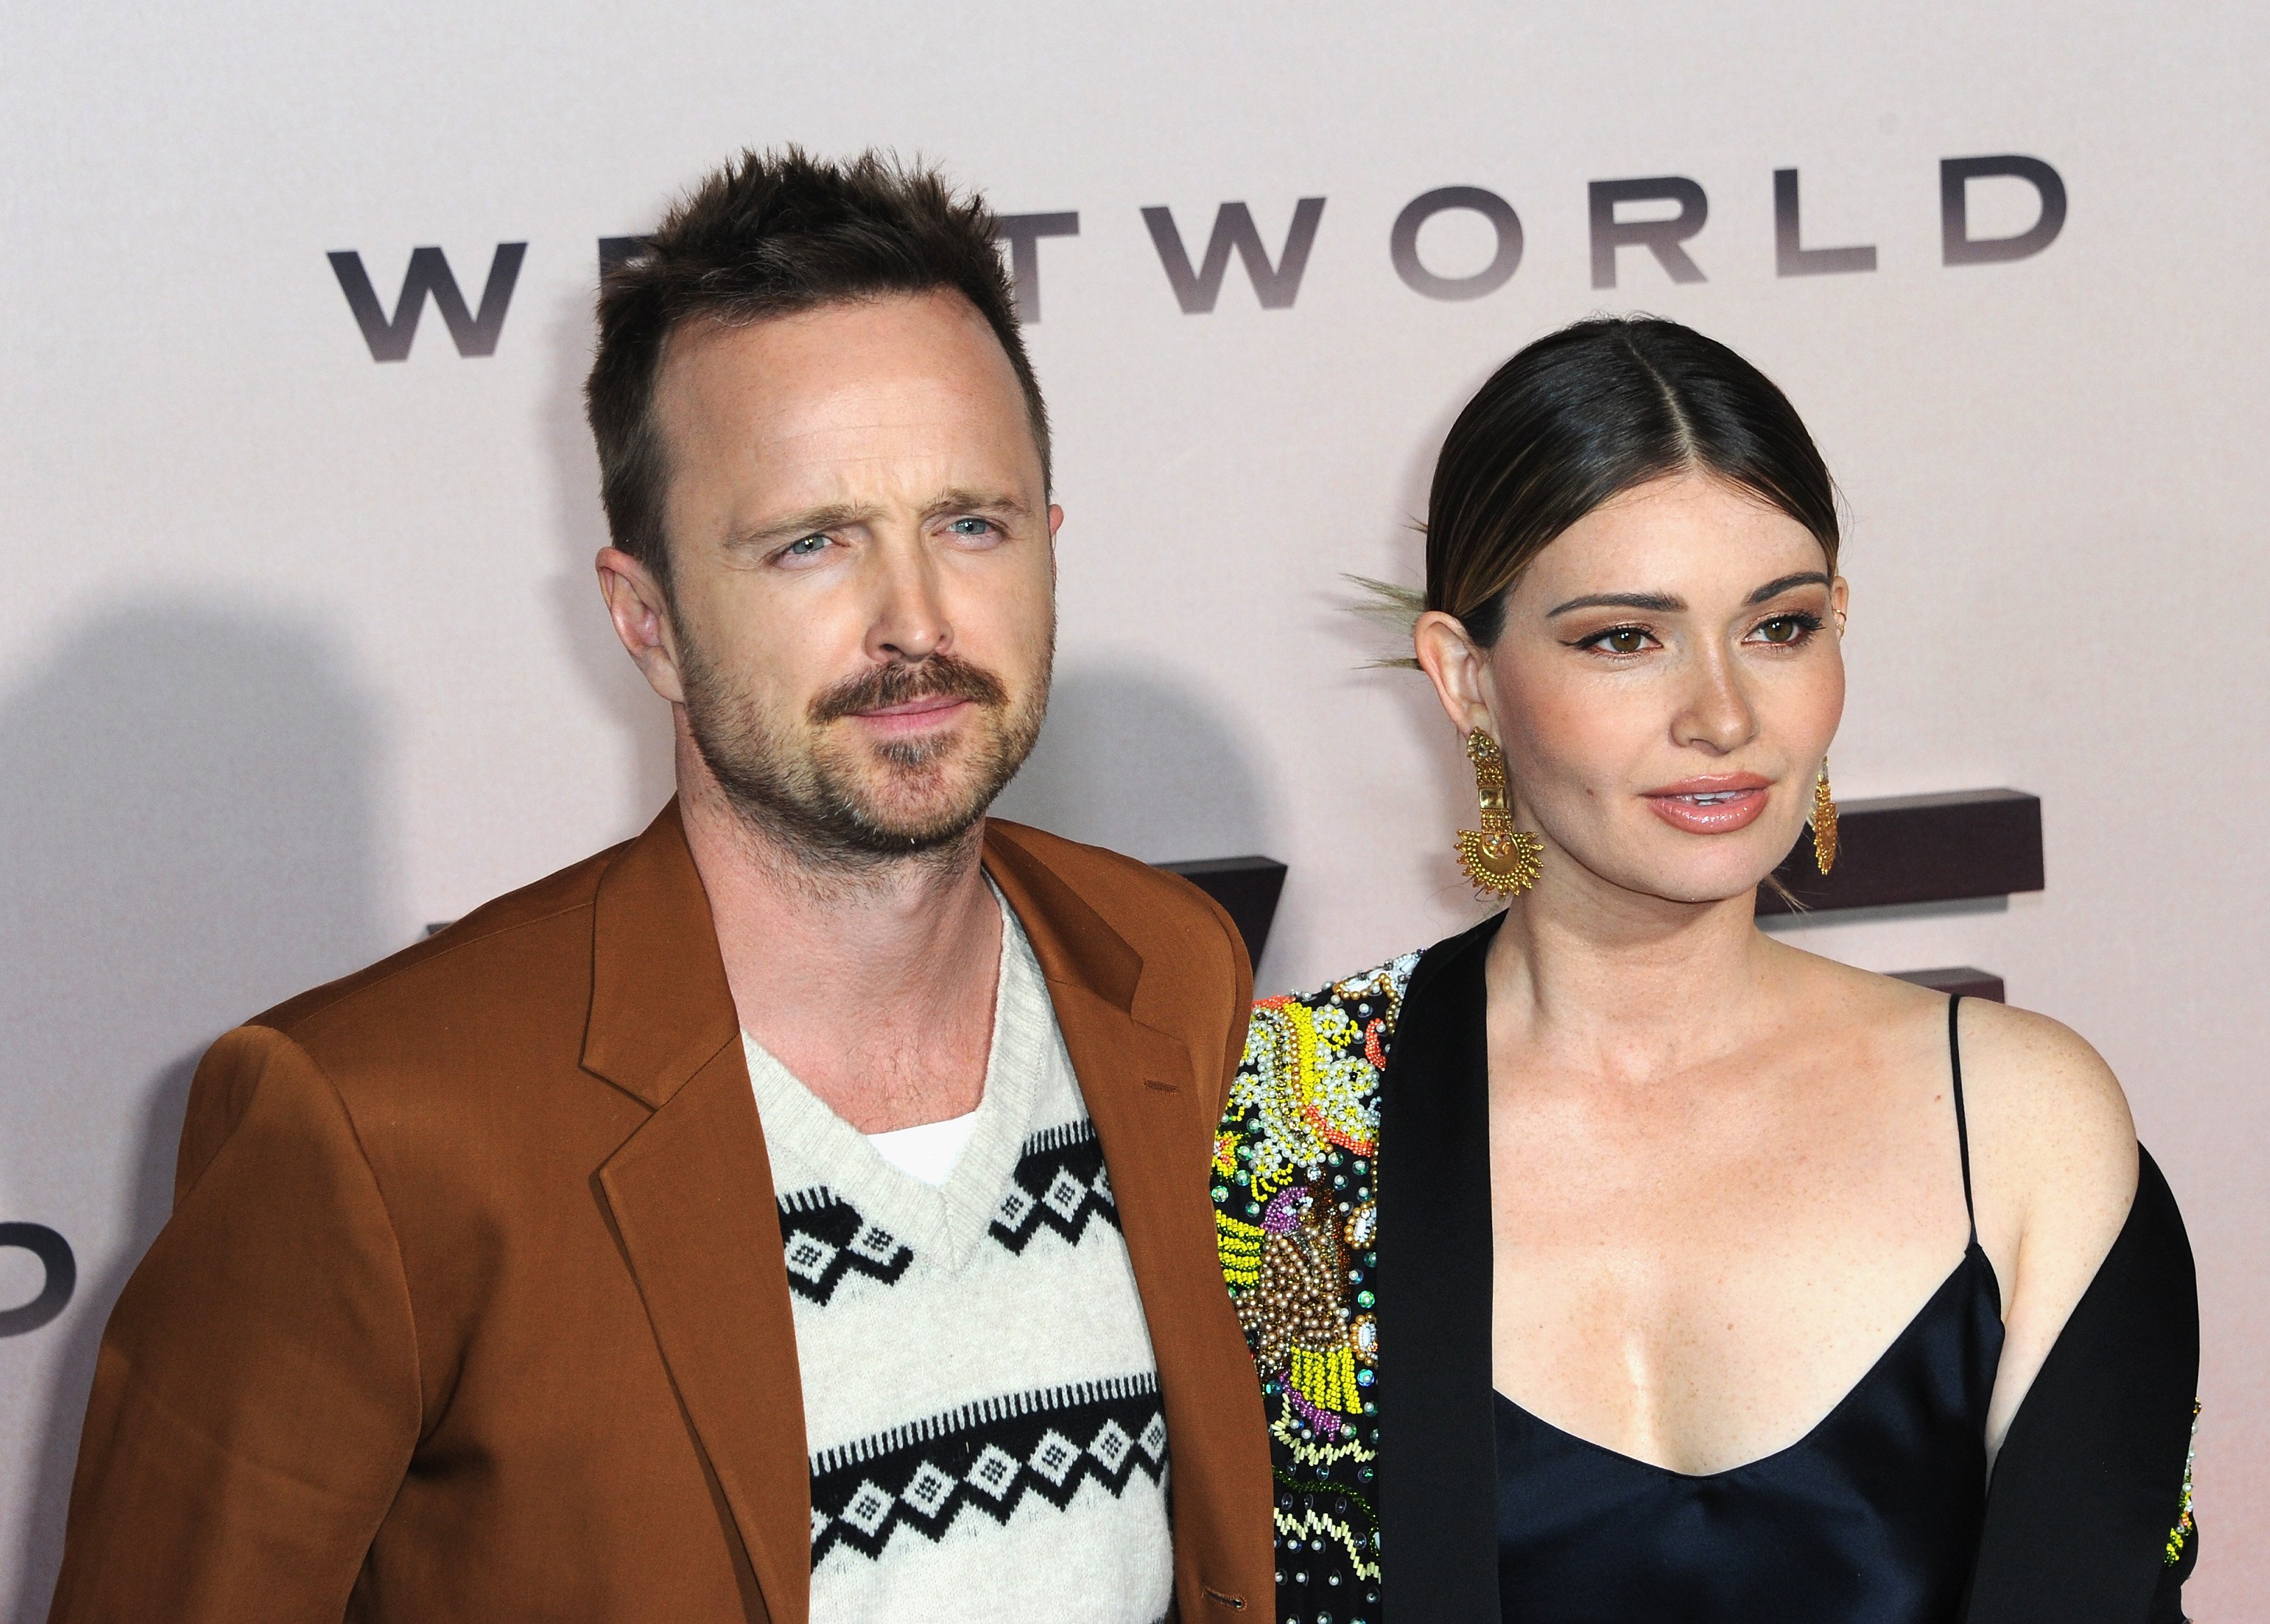 Aaron Paul and Lauren Parsekian attend the Season 3 premiere of HBO's "Westworld" held at TCL Chinese Theatre on March 5, 2020, in Hollywood, California. | Source: Getty Images